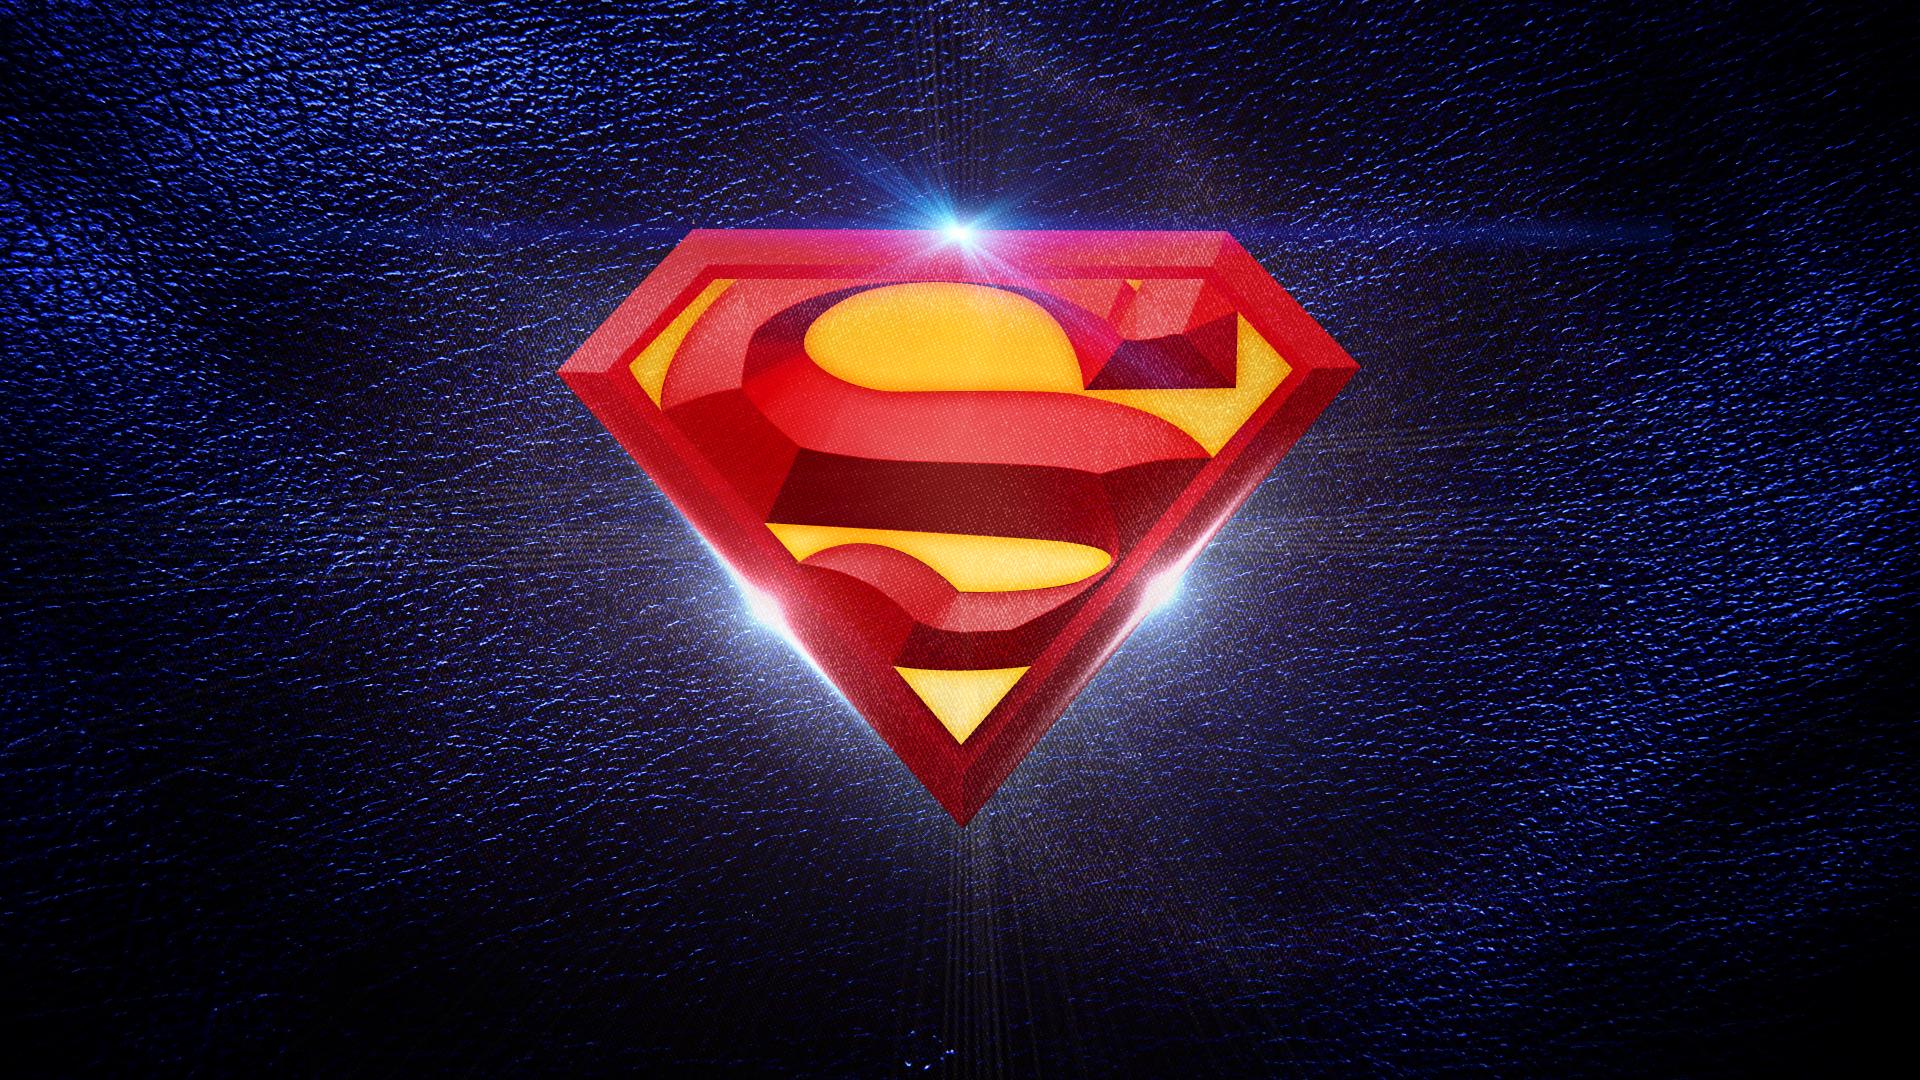 Superman logo wallpaper - - High Quality and Resolution